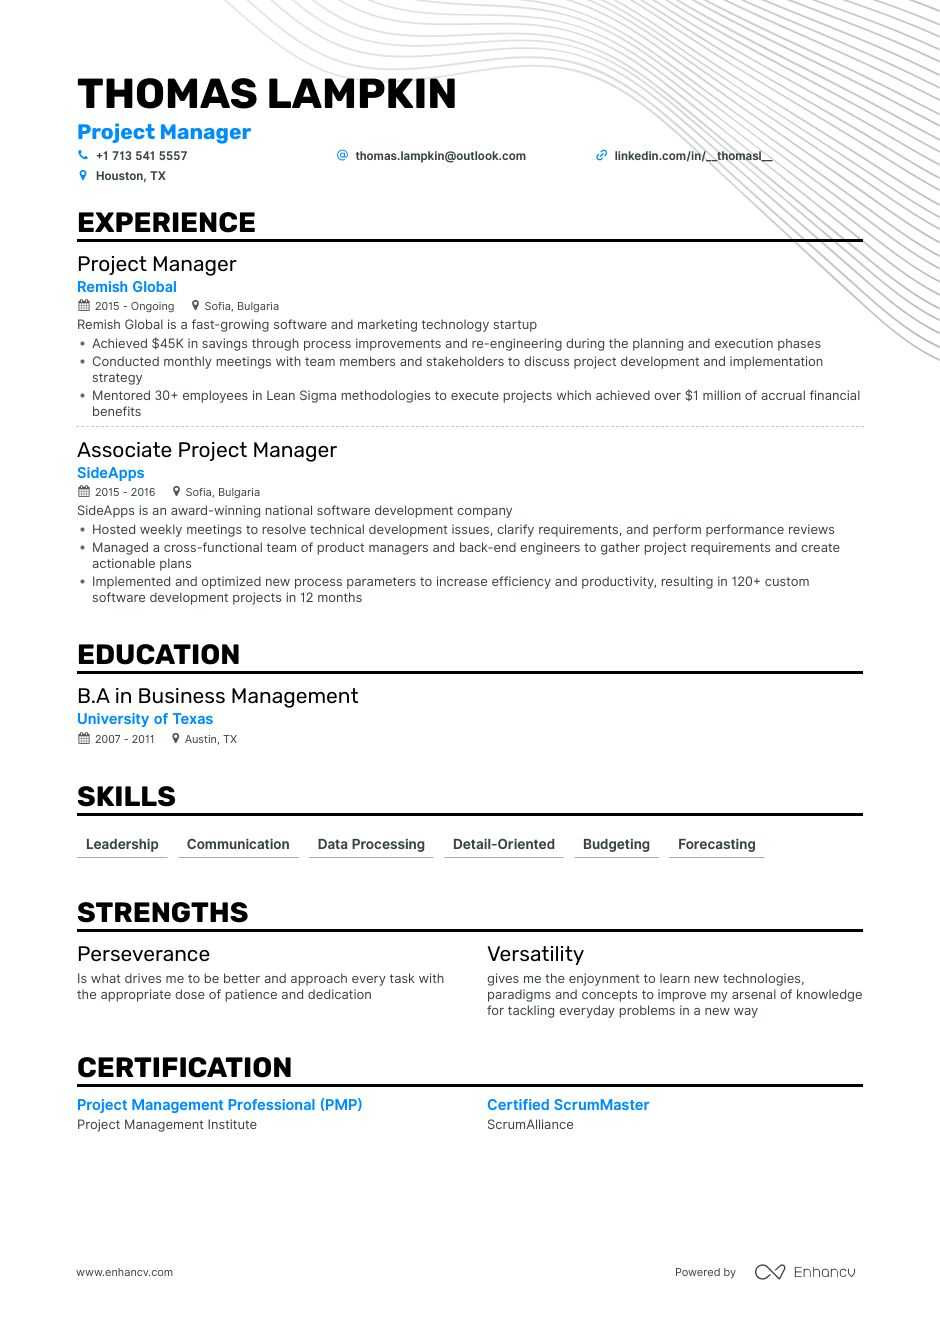 Applicant Tracking System Friendly Resume Template ats-friendly Resume: How to Write A Resume to Beat the Machine …